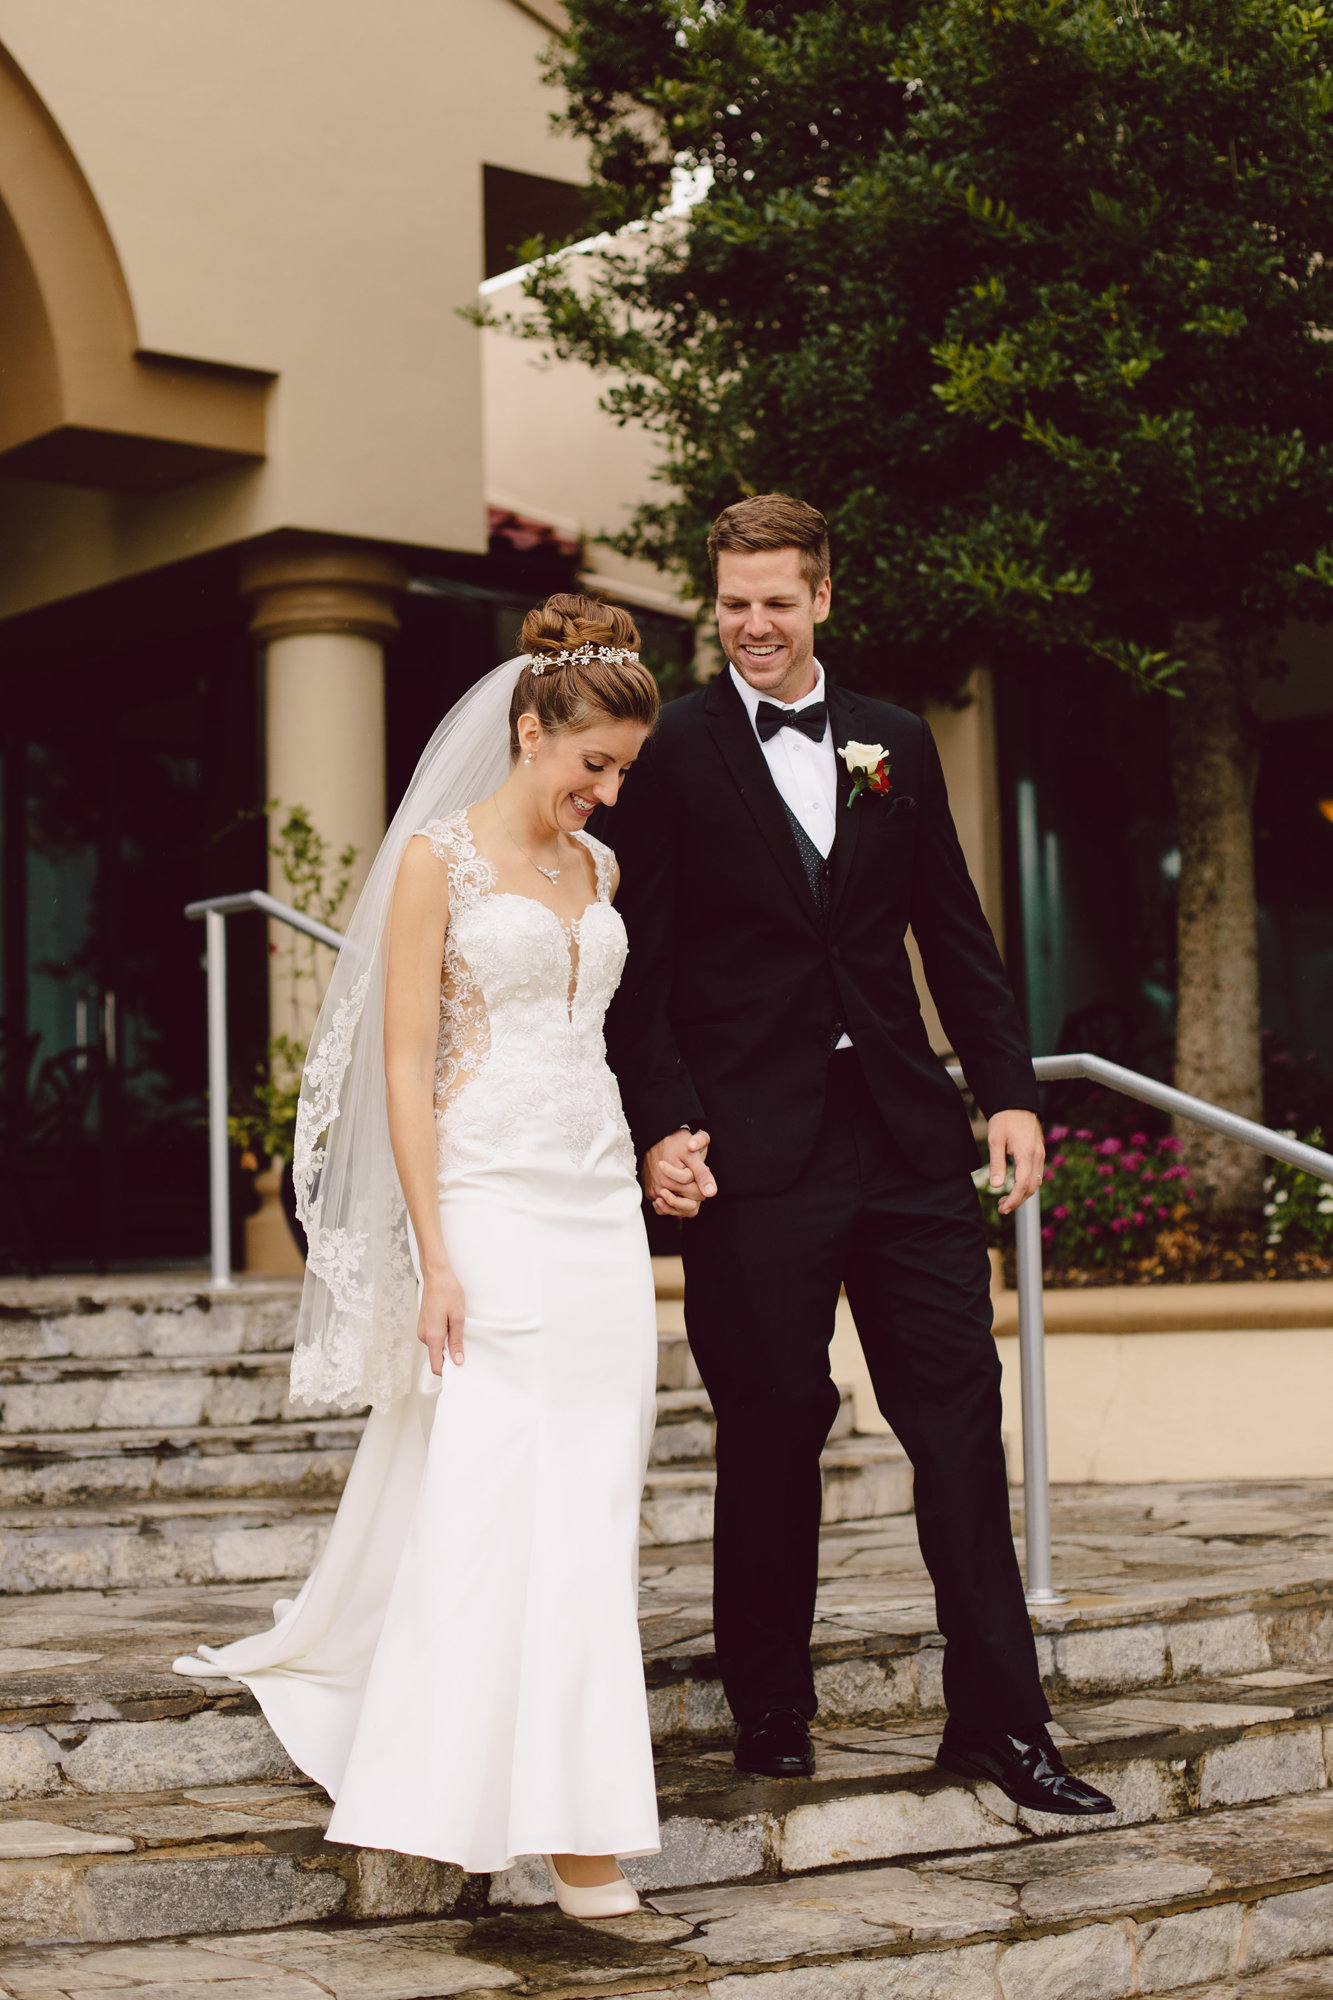 Kelsey Wilson married Spencer Whealy on Sept. 23. Photo by Alyssa Shrock Photography